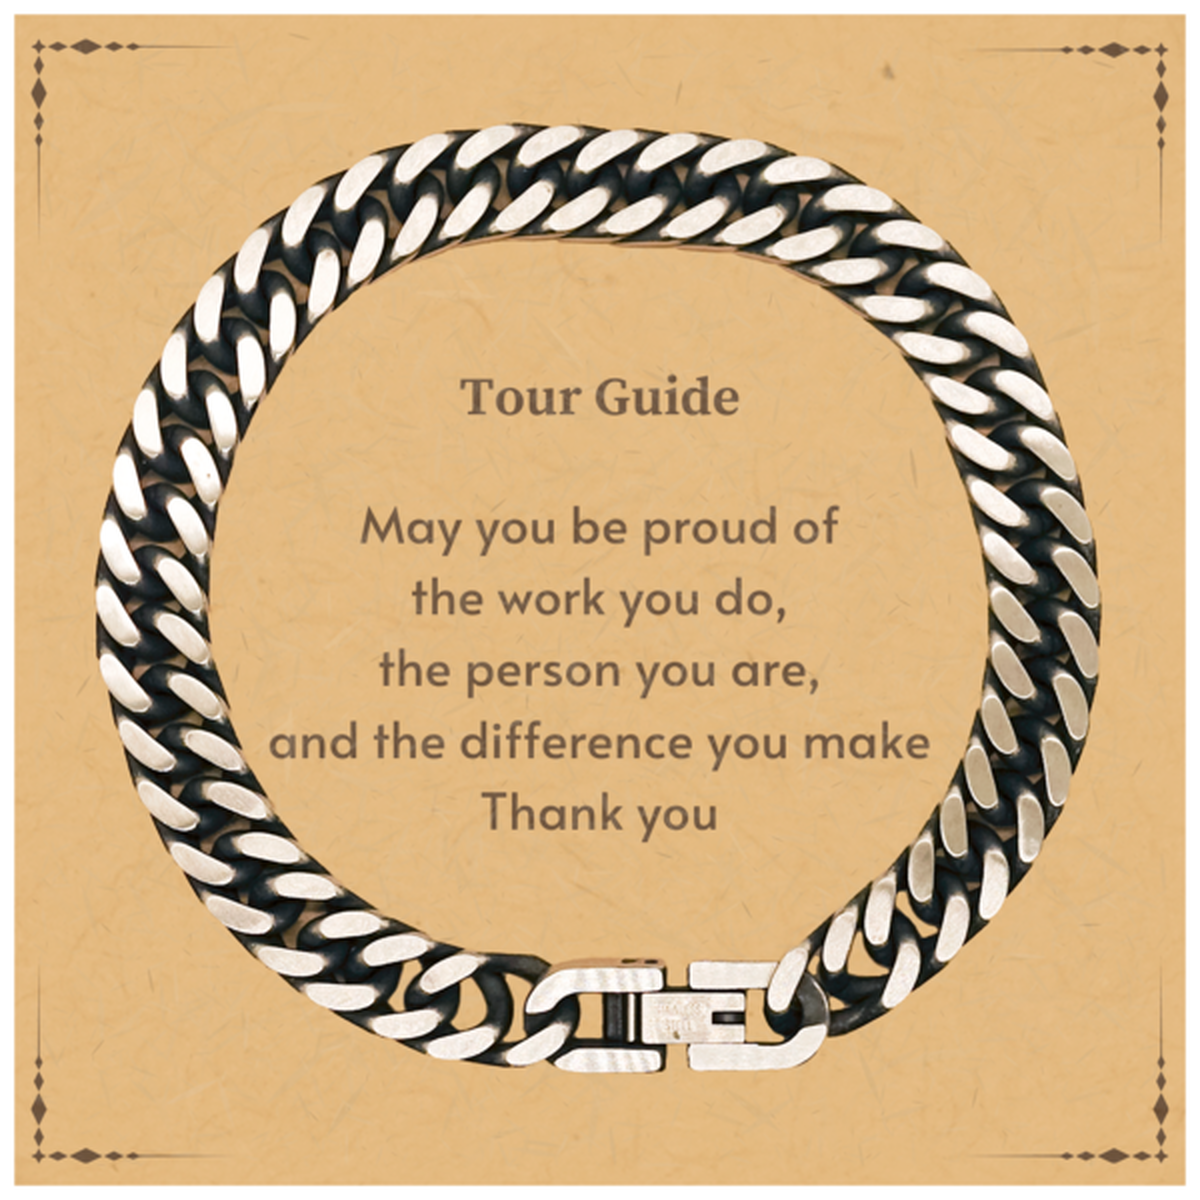 Heartwarming Cuban Link Chain Bracelet Retirement Coworkers Gifts for Tour Guide, Tour Guide May You be proud of the work you do, the person you are Gifts for Boss Men Women Friends